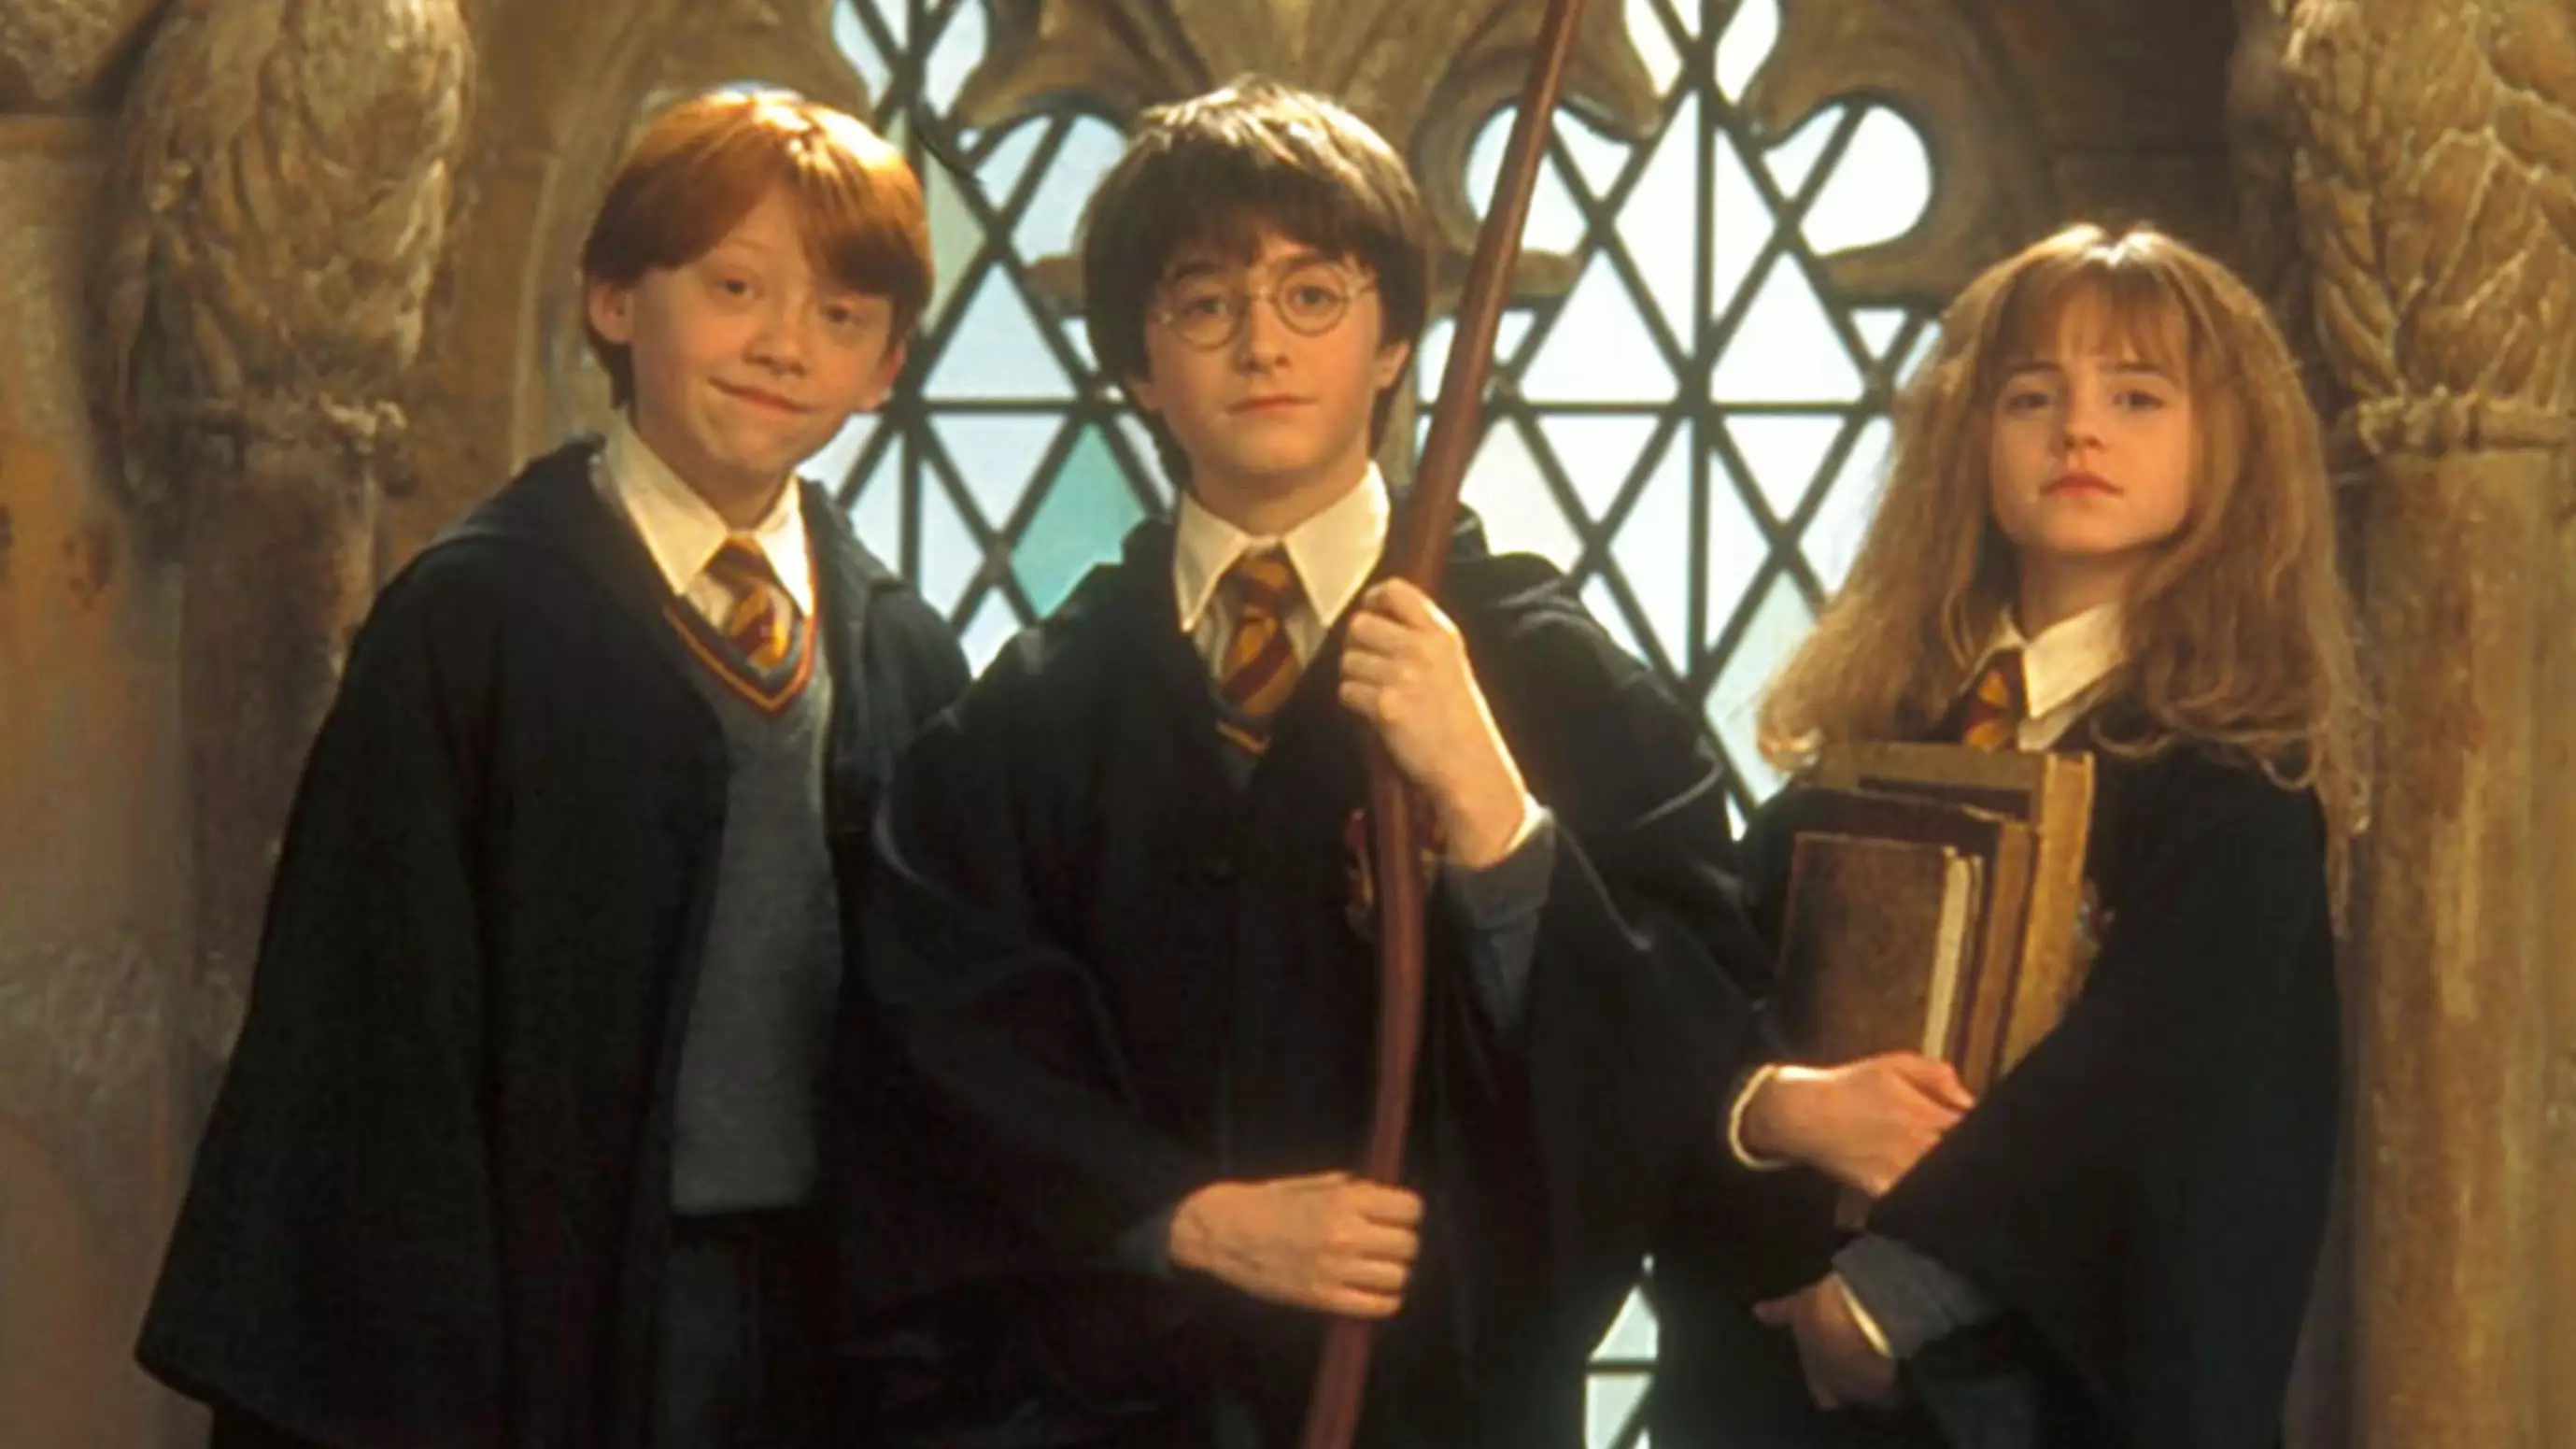 Harry Potter Director Wants To Drop A Three-Hour Cut Of 'Philosopher's Stone’